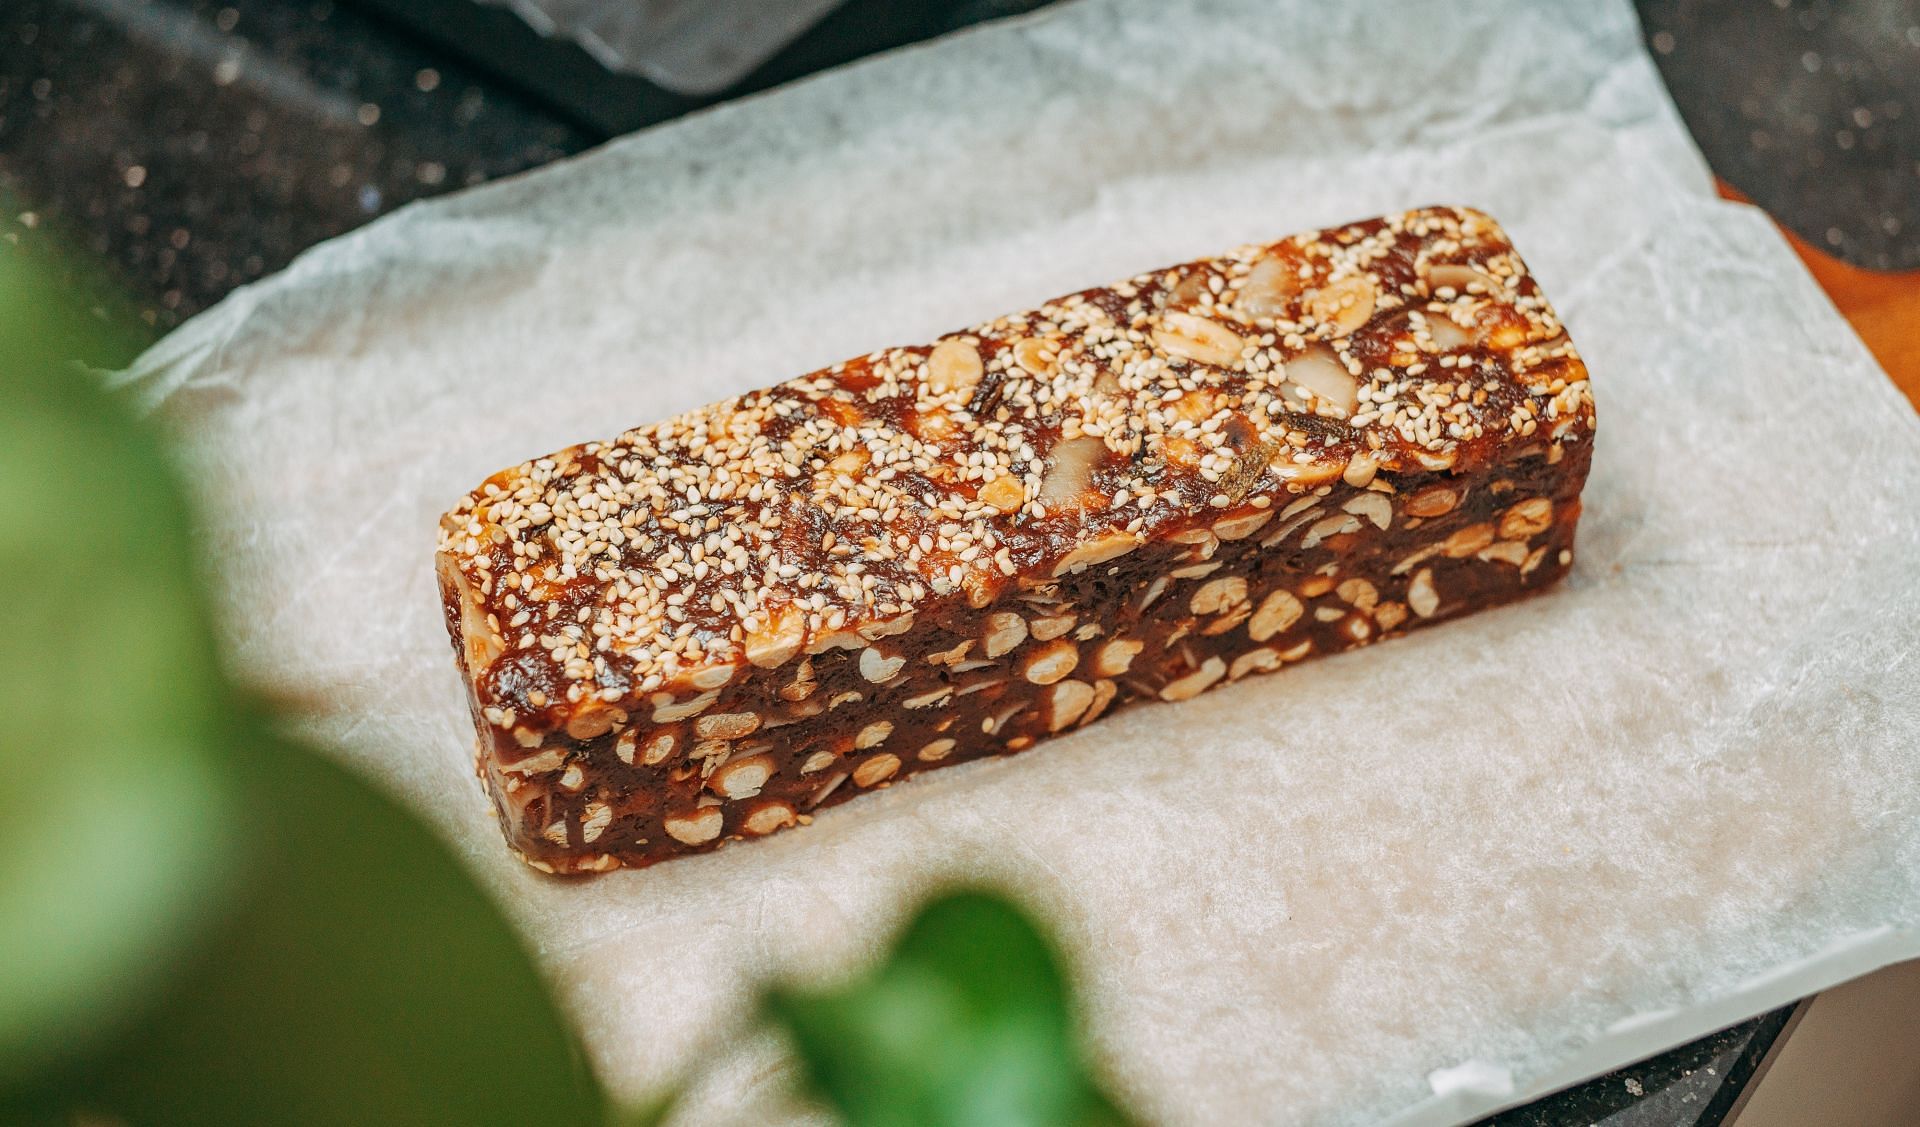 Benefits of having protein bars (image sourced via Pexels / Photo by Pexels)